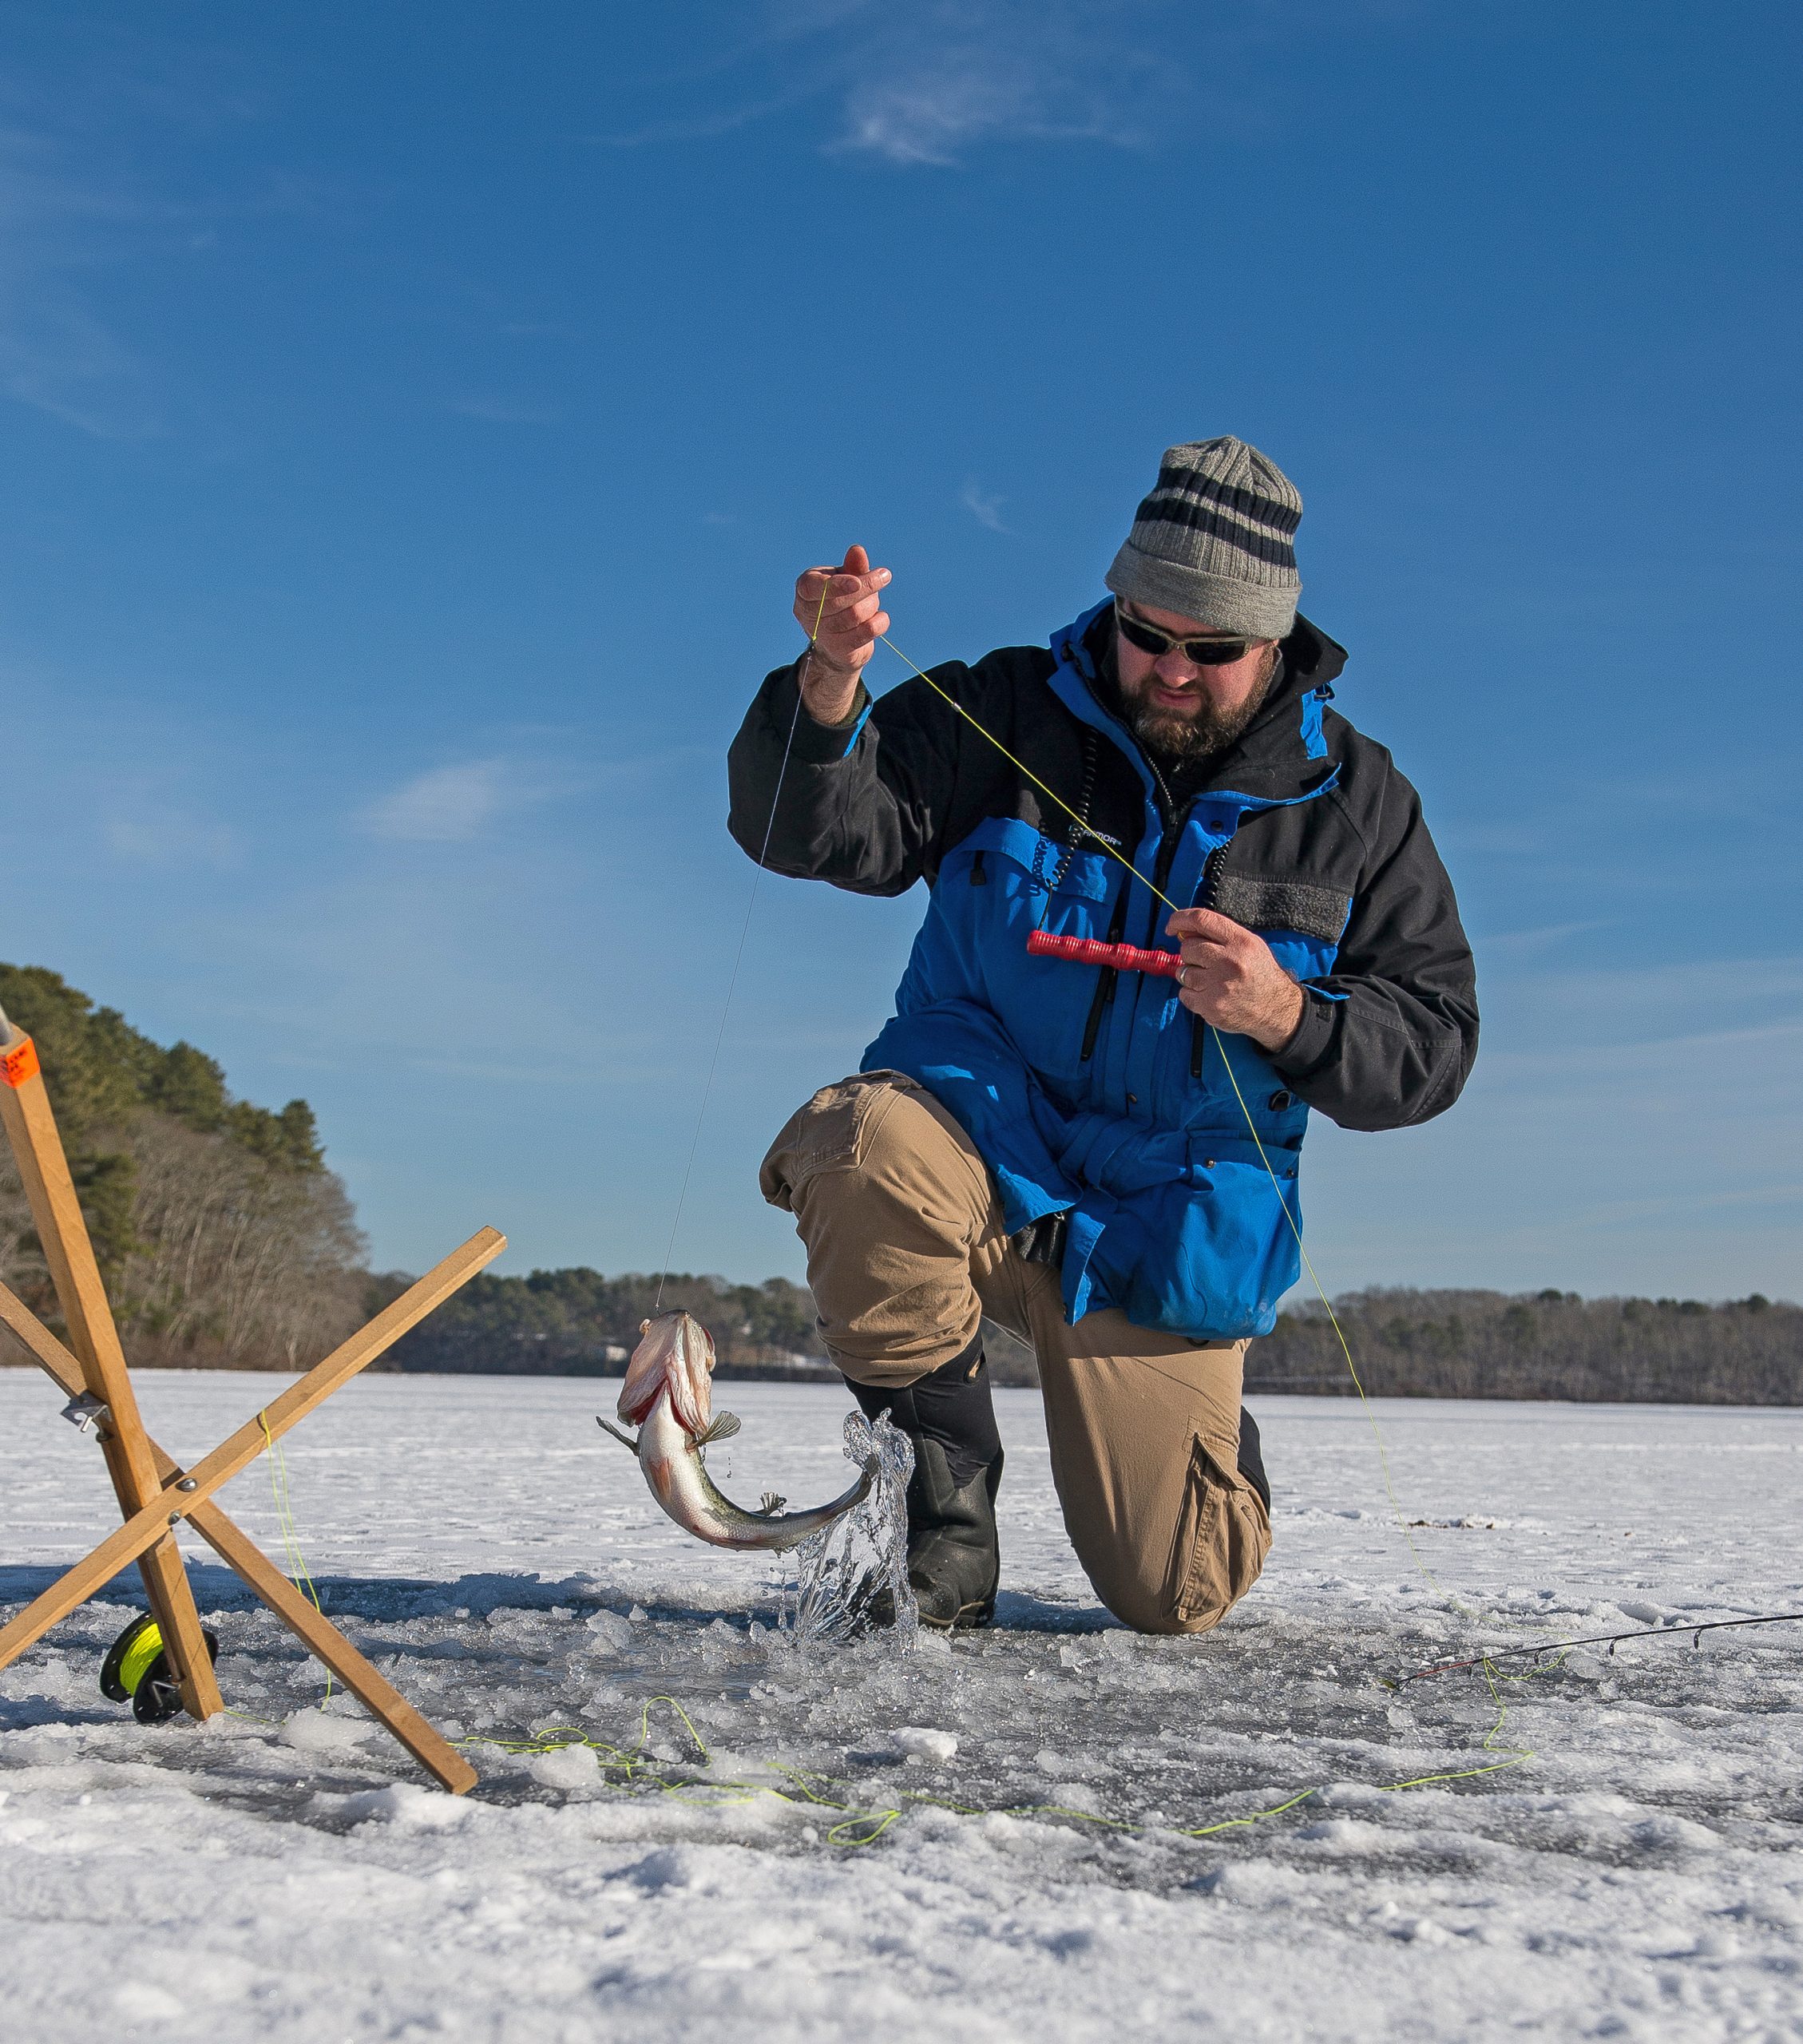 Ice Fishing - Fun For One and All